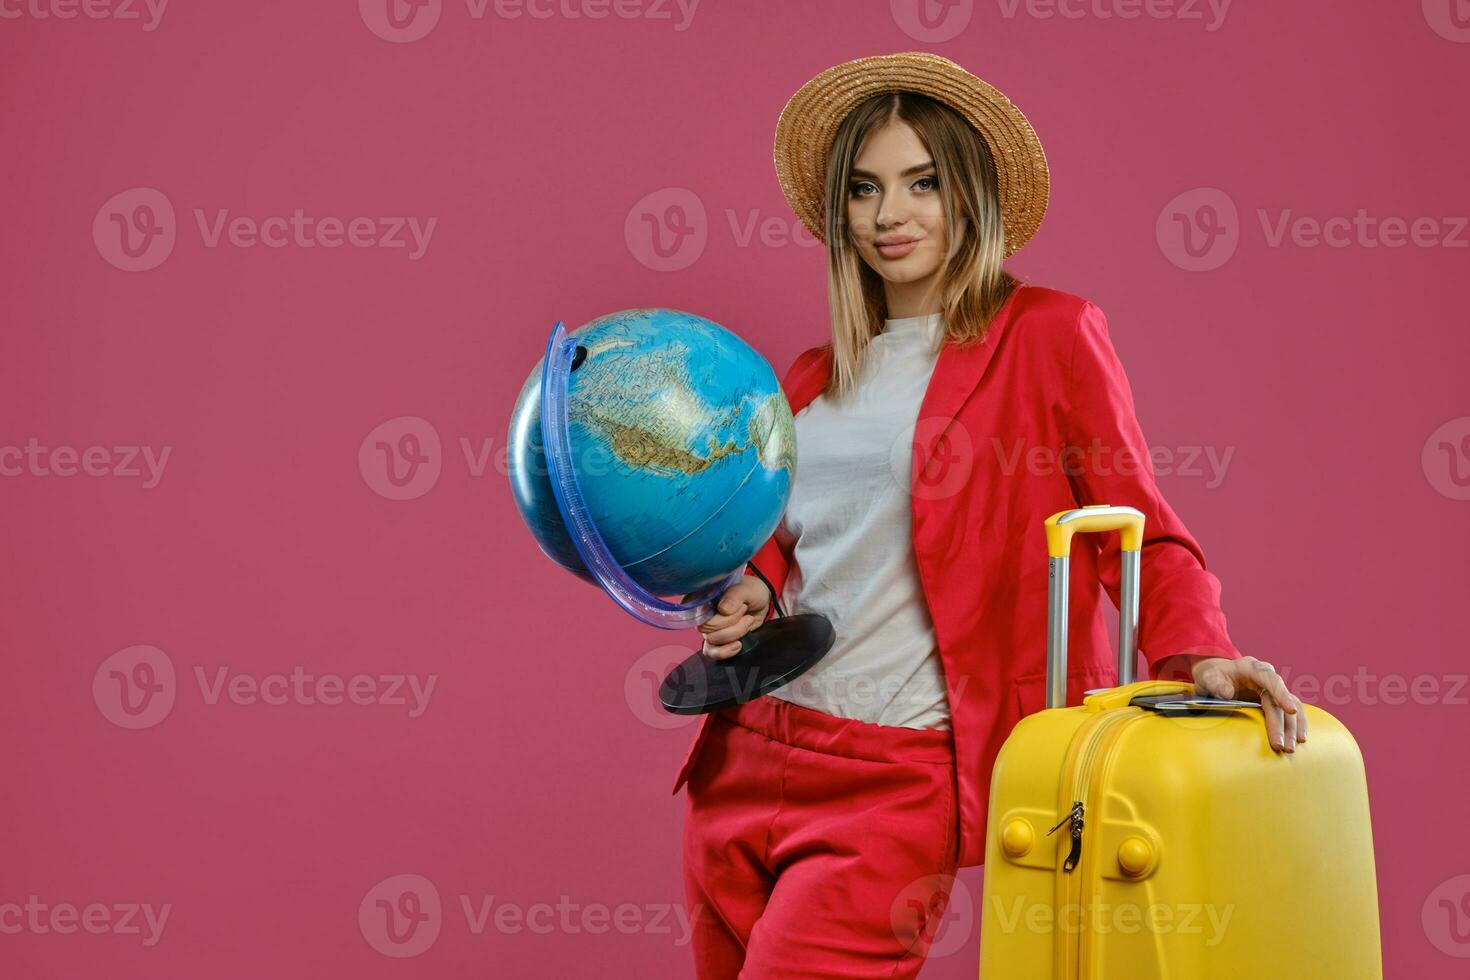 Lady in hat, white blouse, red pantsuit. Smiling, holding globe. Leaning on yellow suitcase, passport and ticket on it, posing on pink background photo